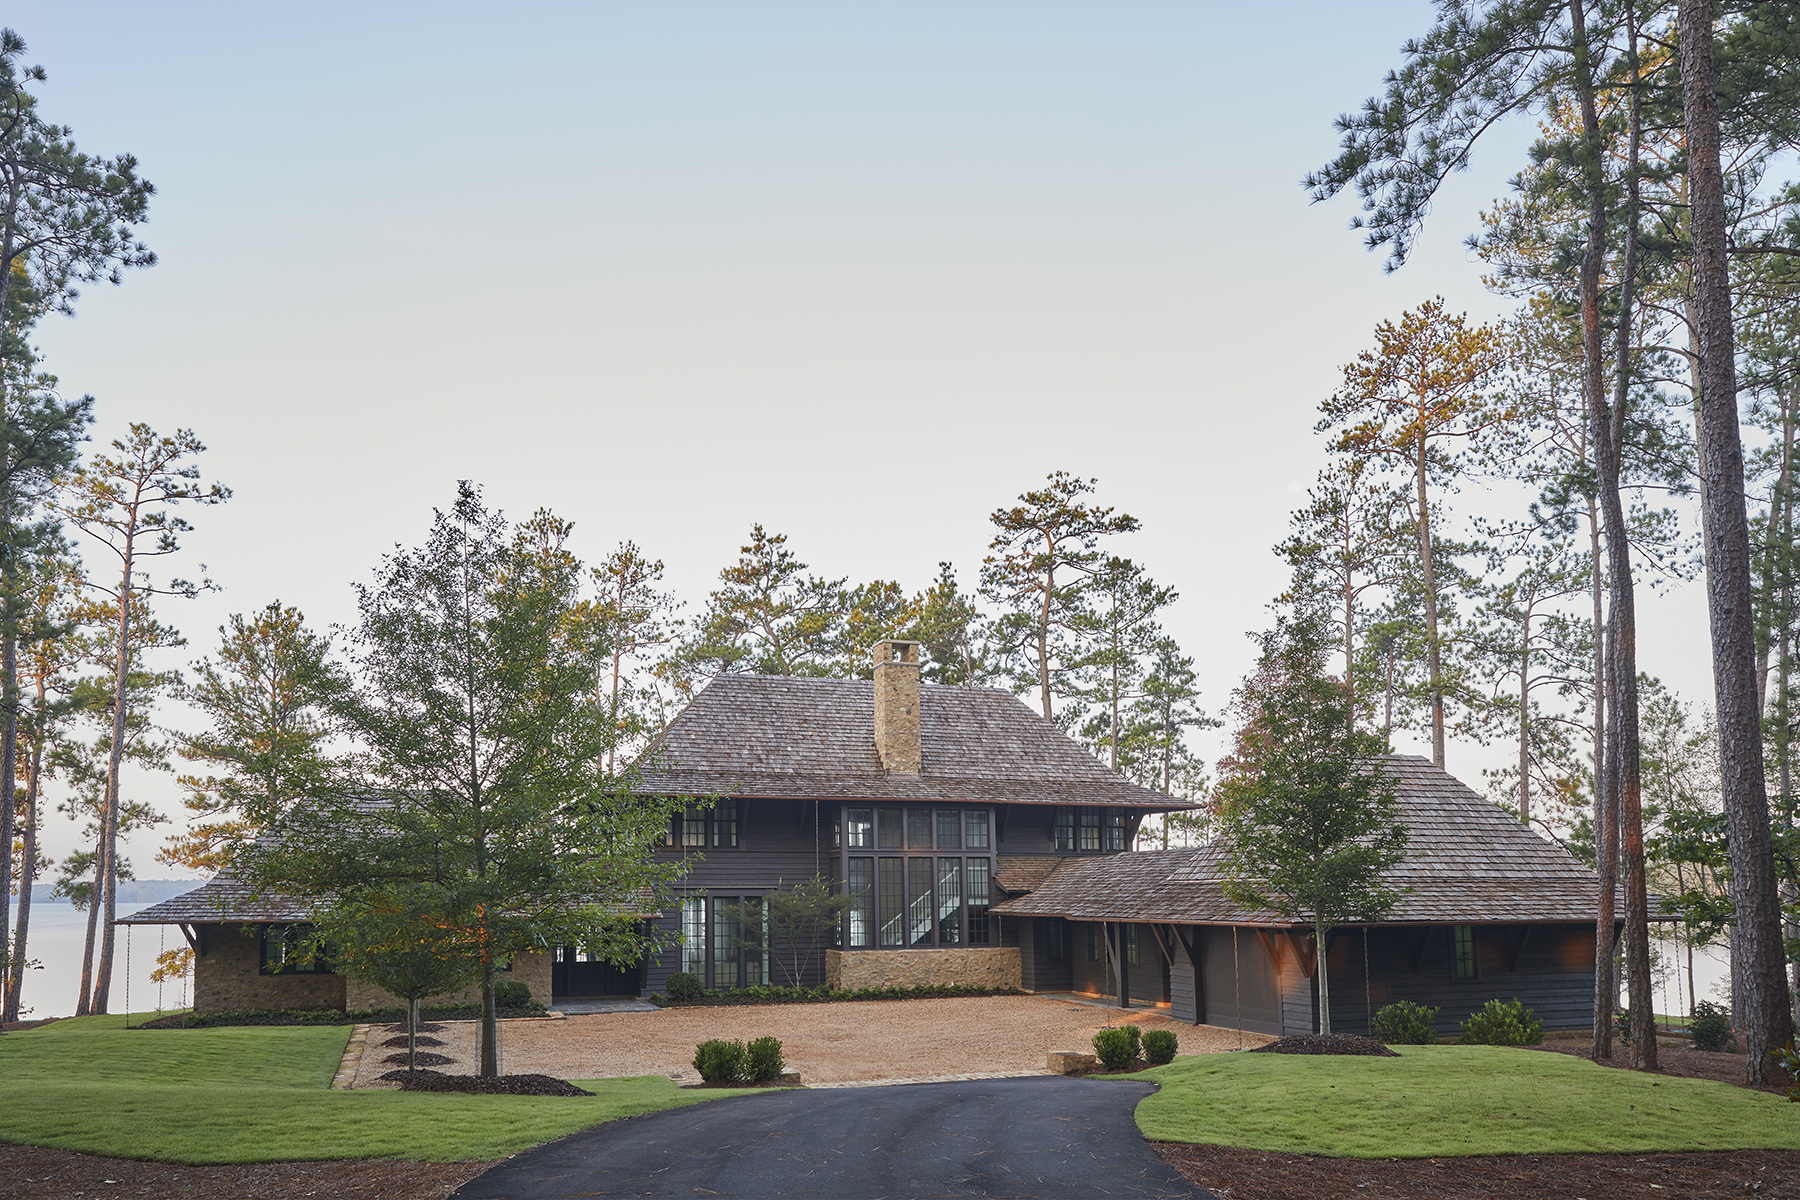 Exterior elevation of lake home designed by Ashley Gilbreath